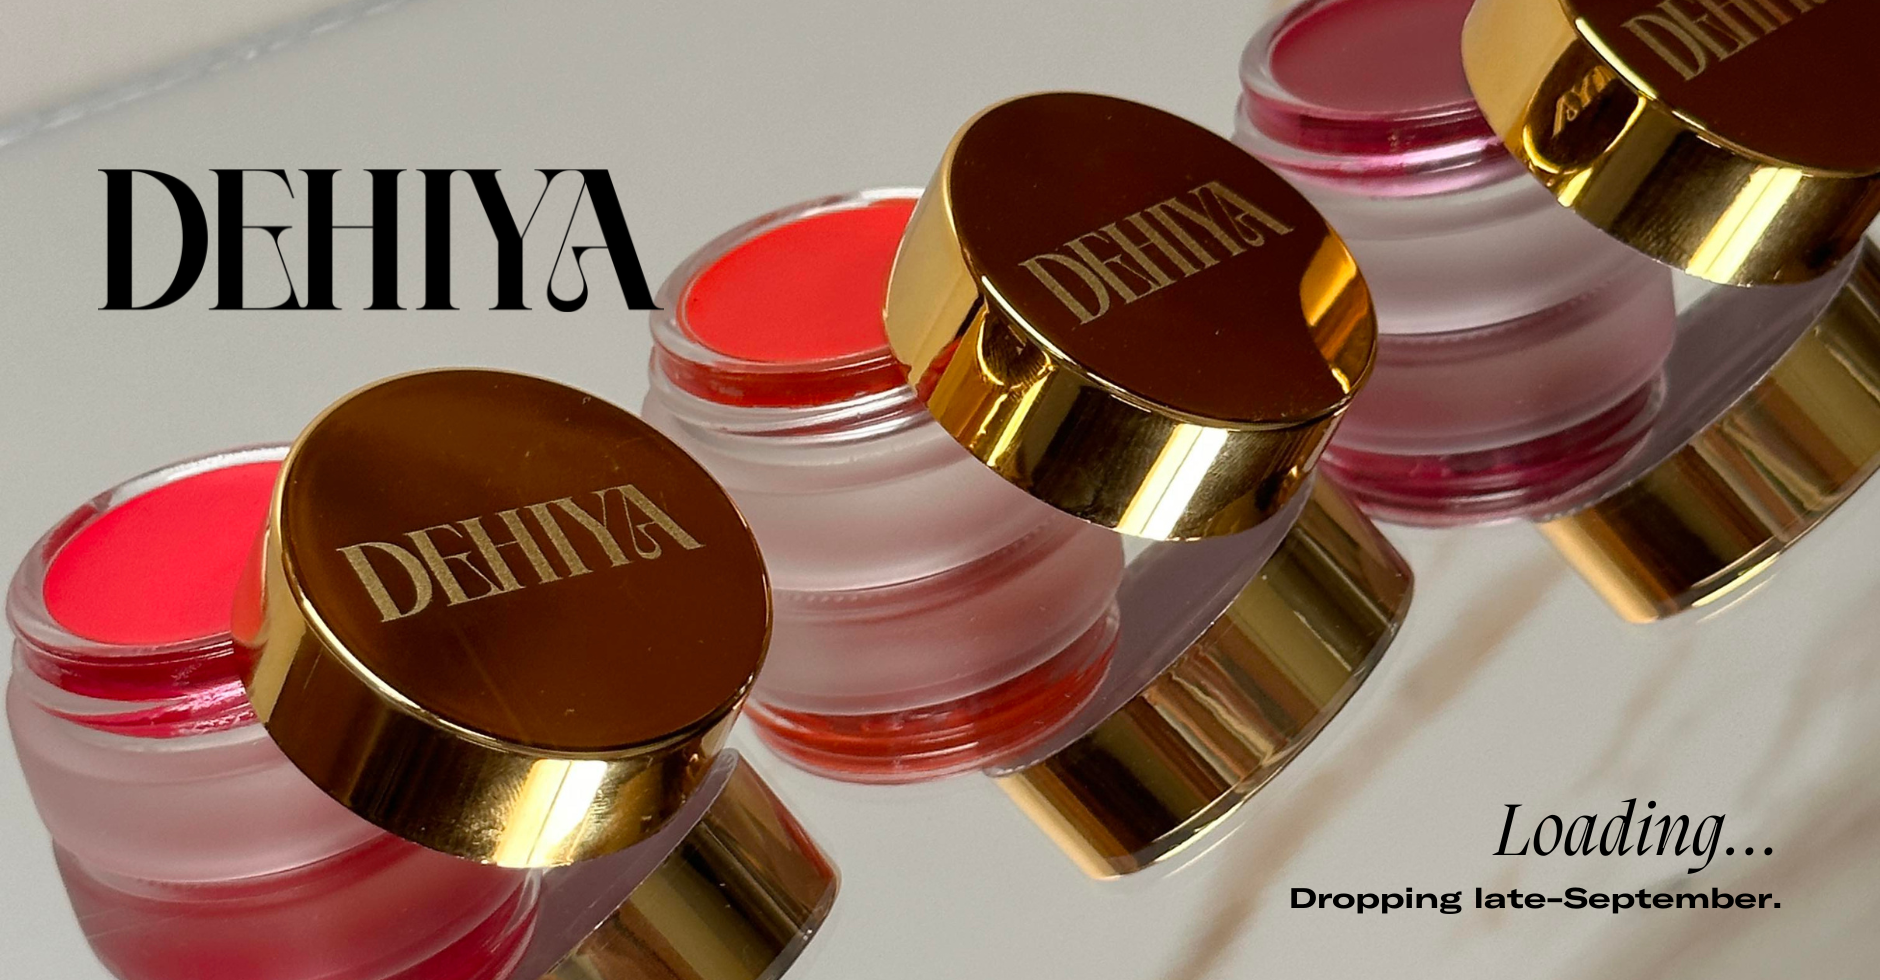 DEHIYA Logo, Text: Loading...dropping late-September, trio of lip and cheek pots open with gold caps, colors are pink, orange-red, dark pink